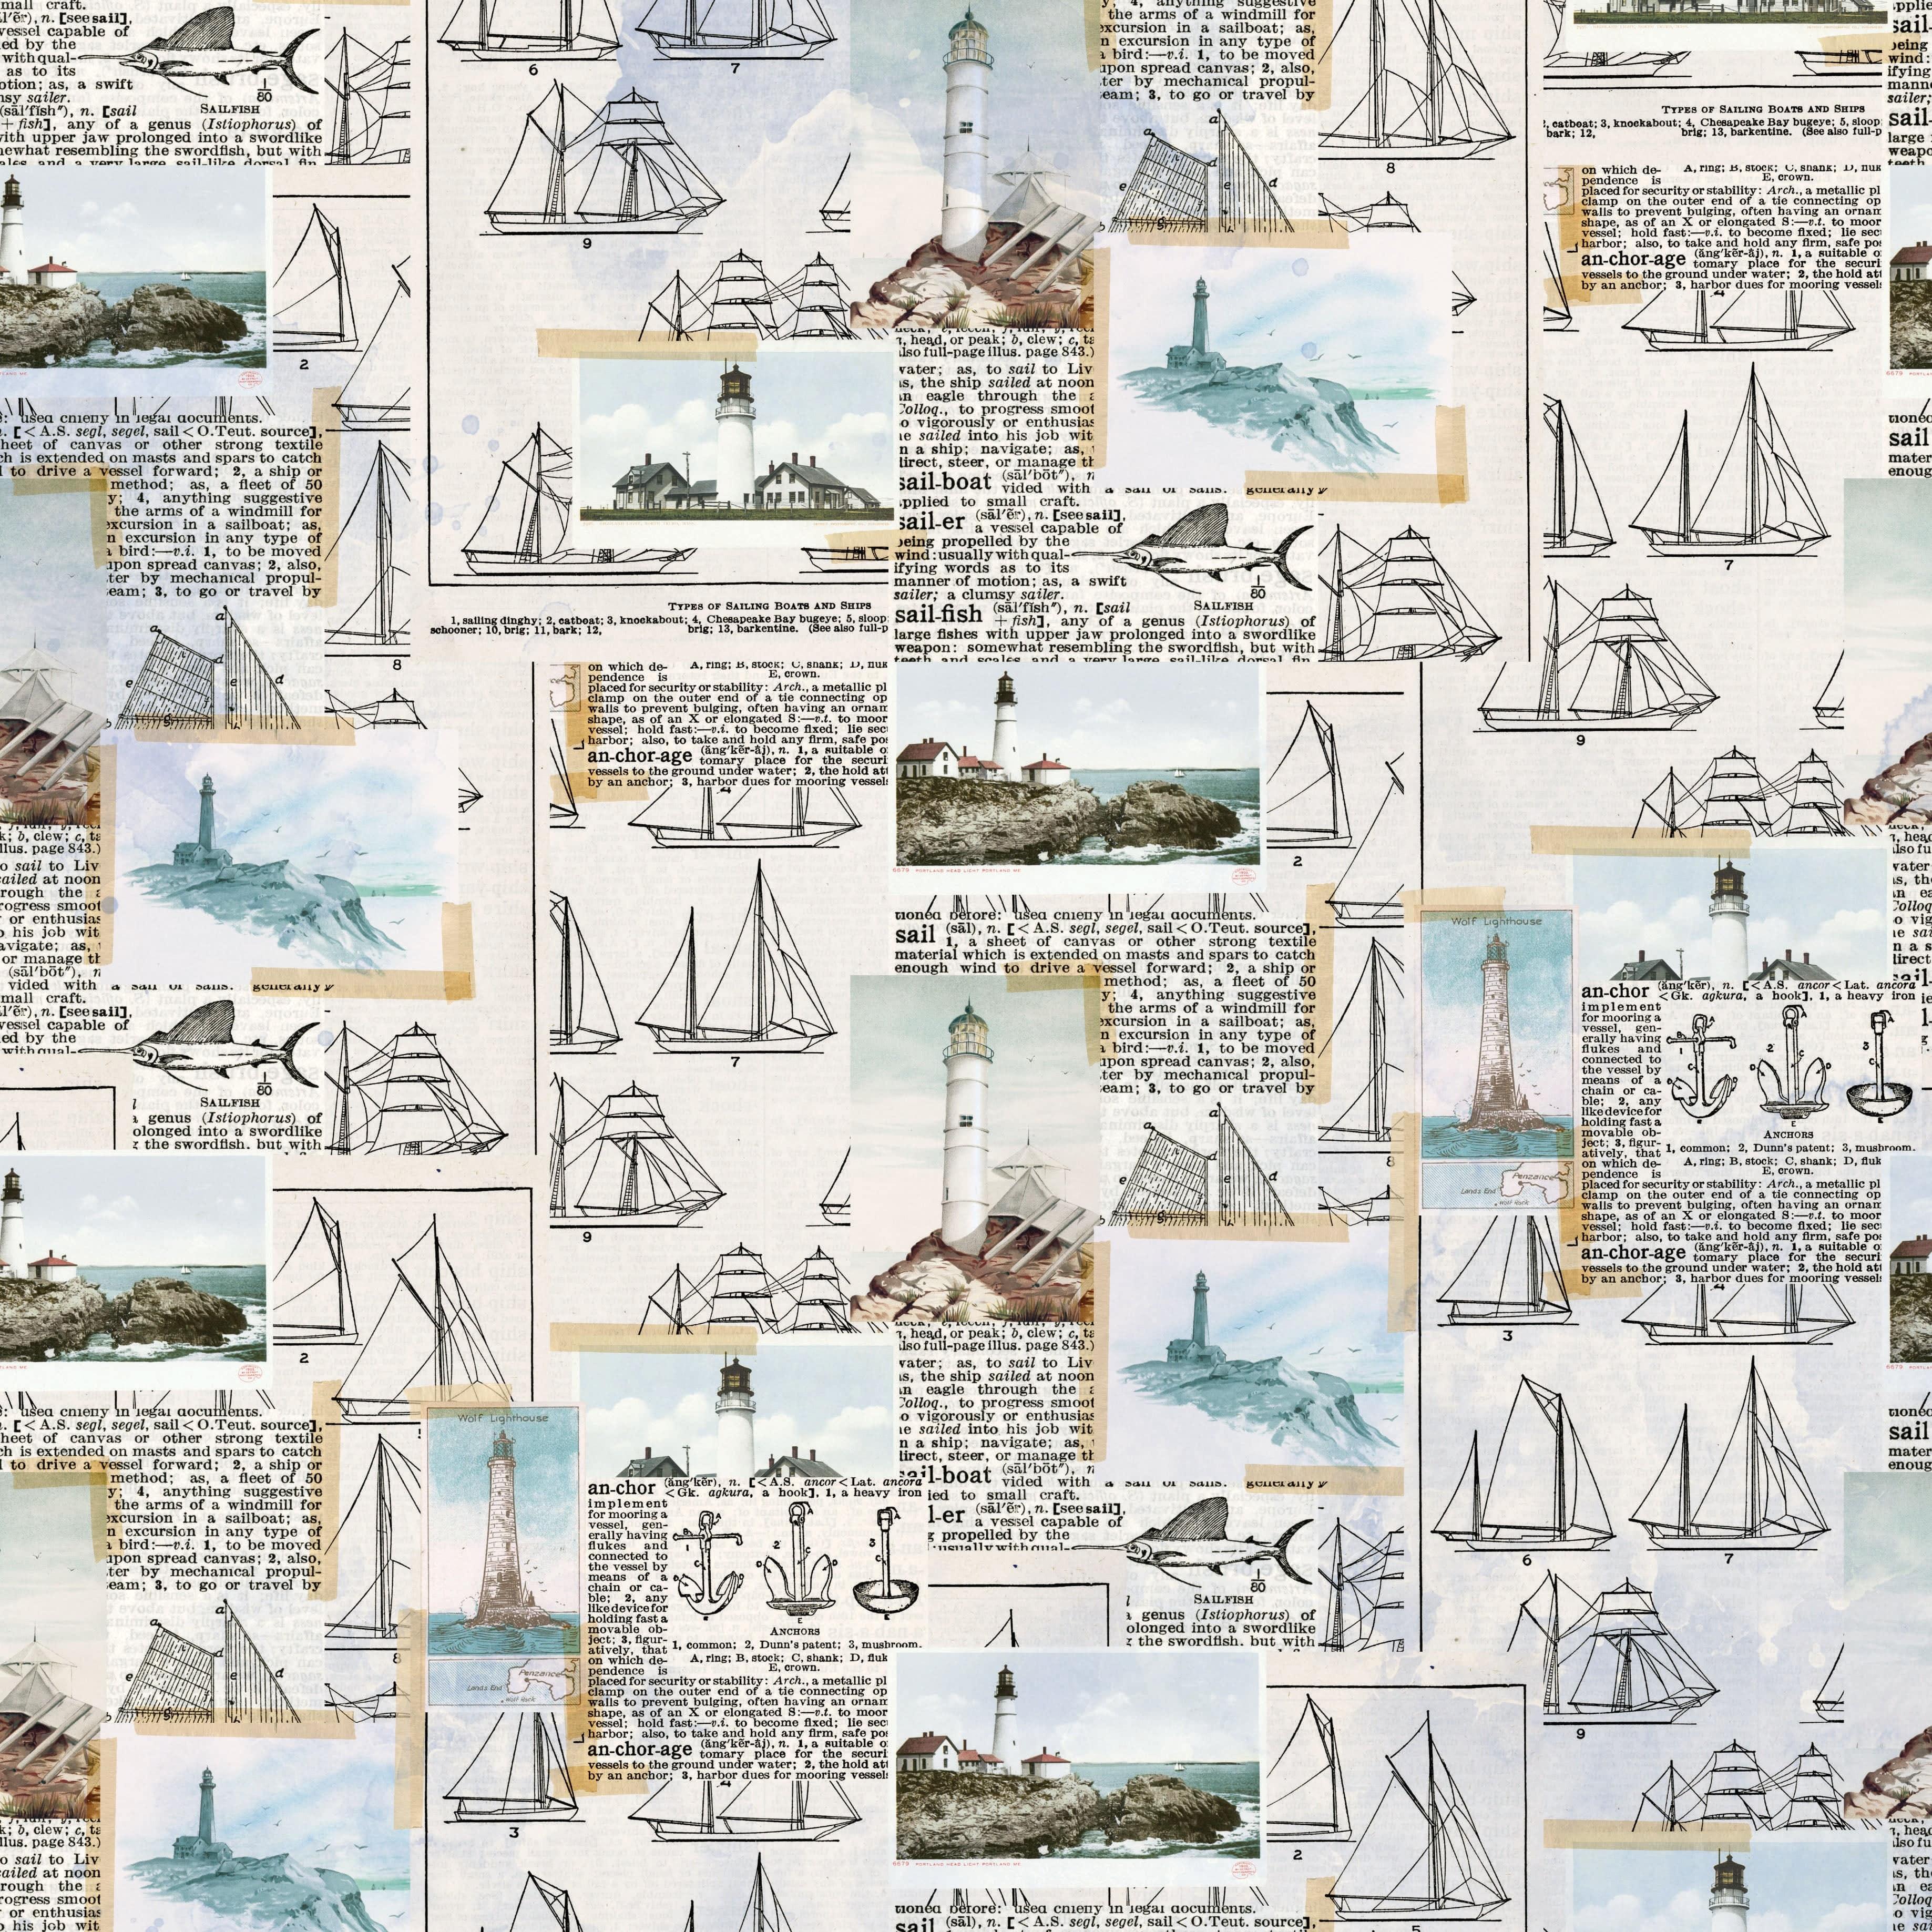 Vintage Seas Collection Sail Away 12 x 12 Double-Sided Scrapbook Paper by Simple Stories - Scrapbook Supply Companies